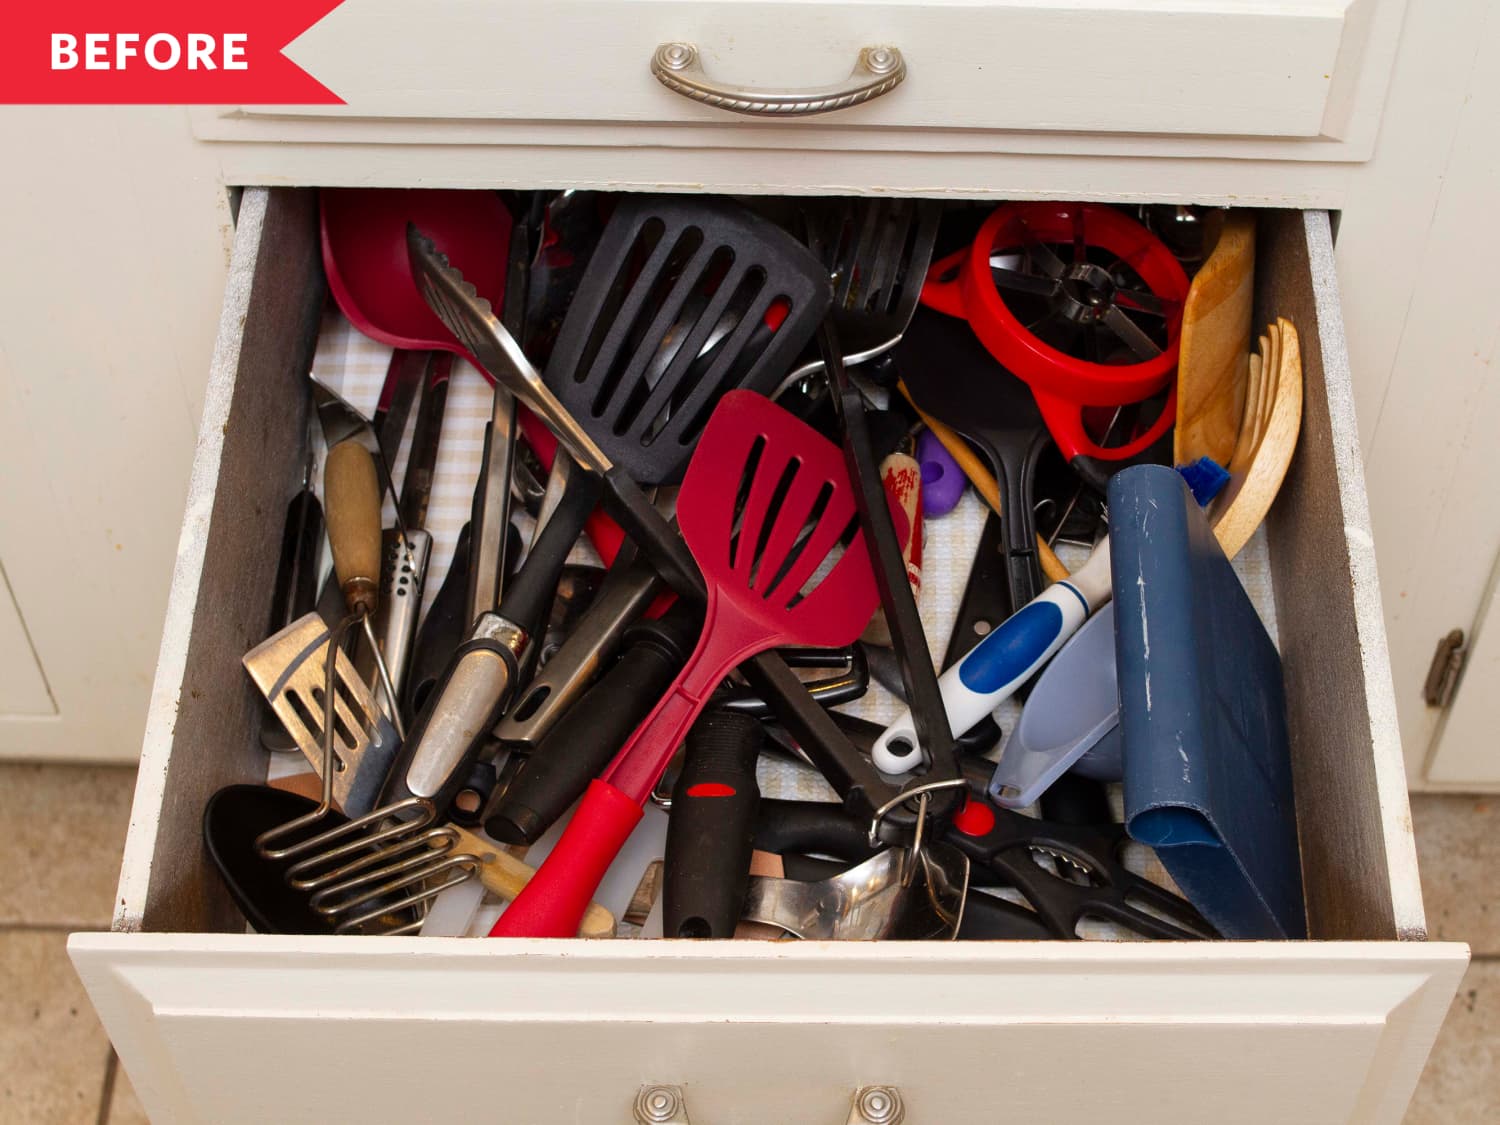 How To Organize Kitchen Drawers - Small Stuff Counts